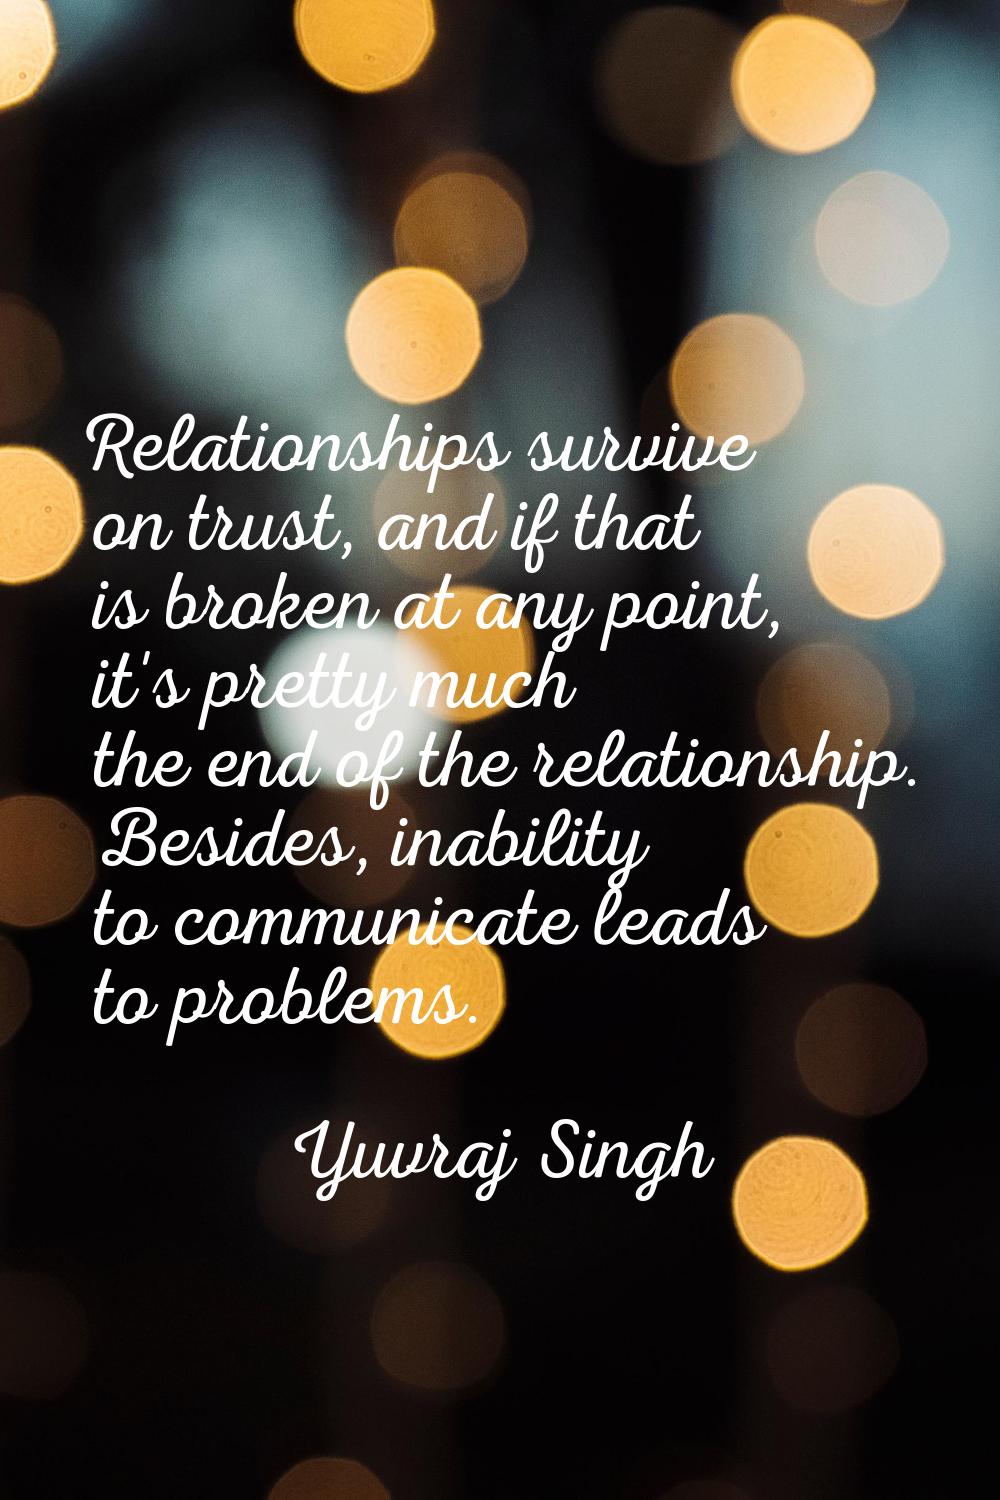 Relationships survive on trust, and if that is broken at any point, it's pretty much the end of the